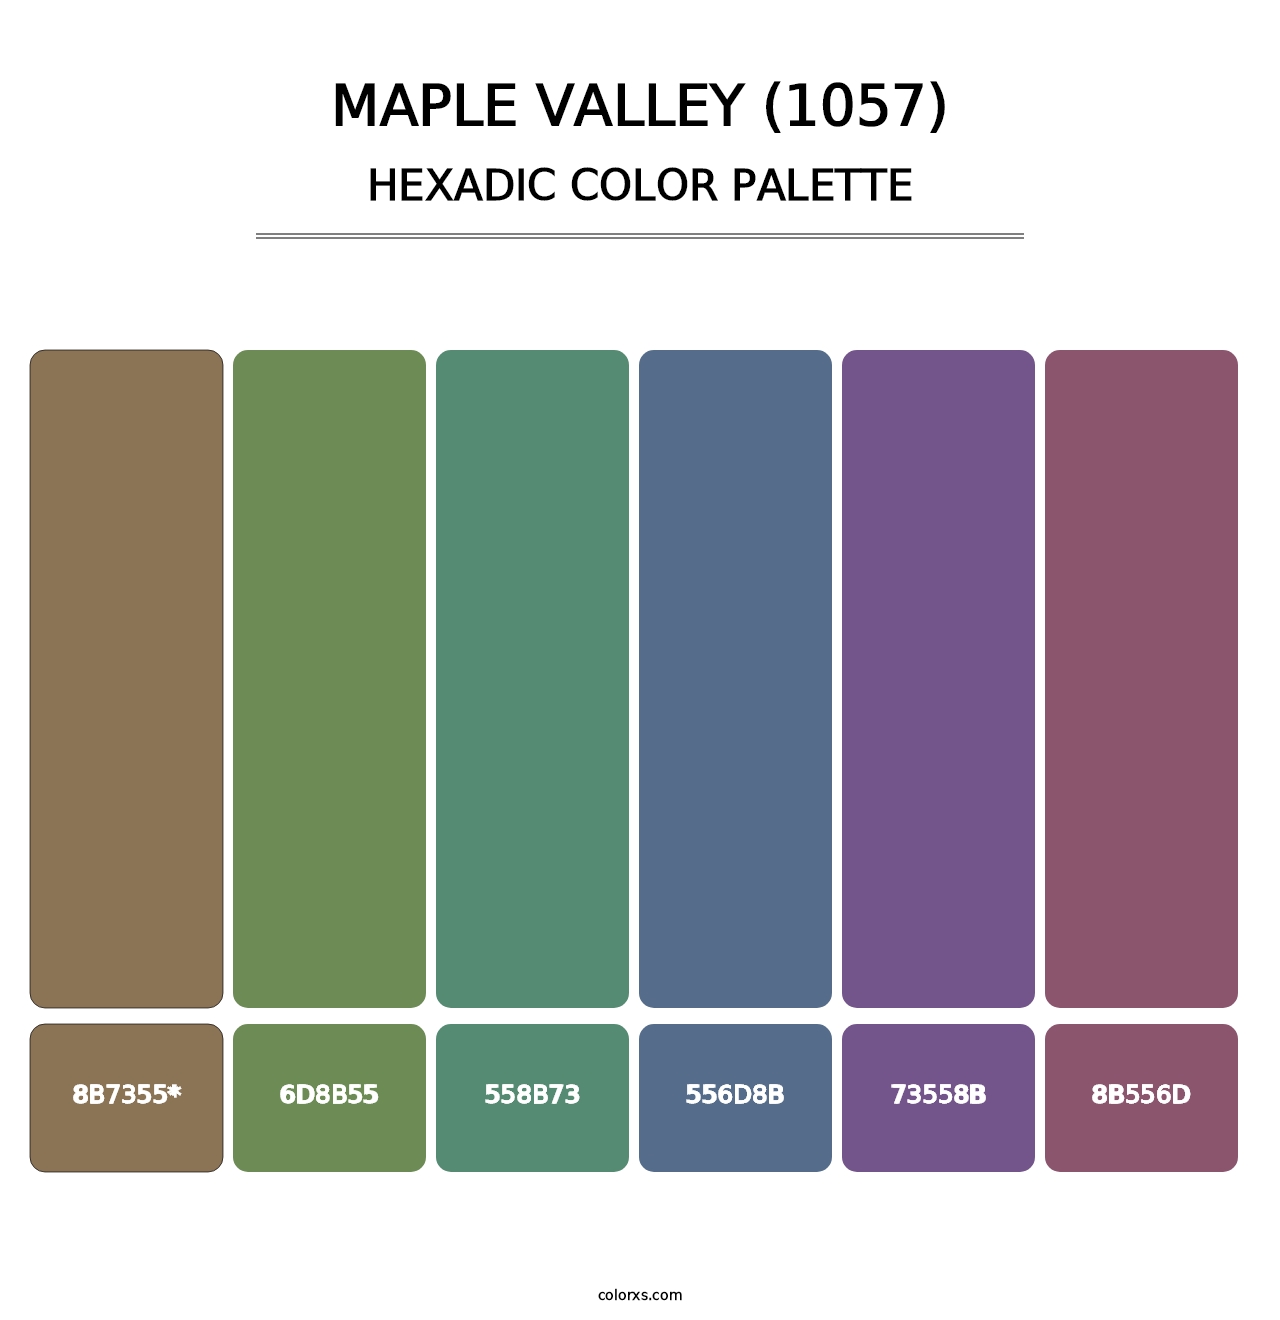 Maple Valley (1057) - Hexadic Color Palette